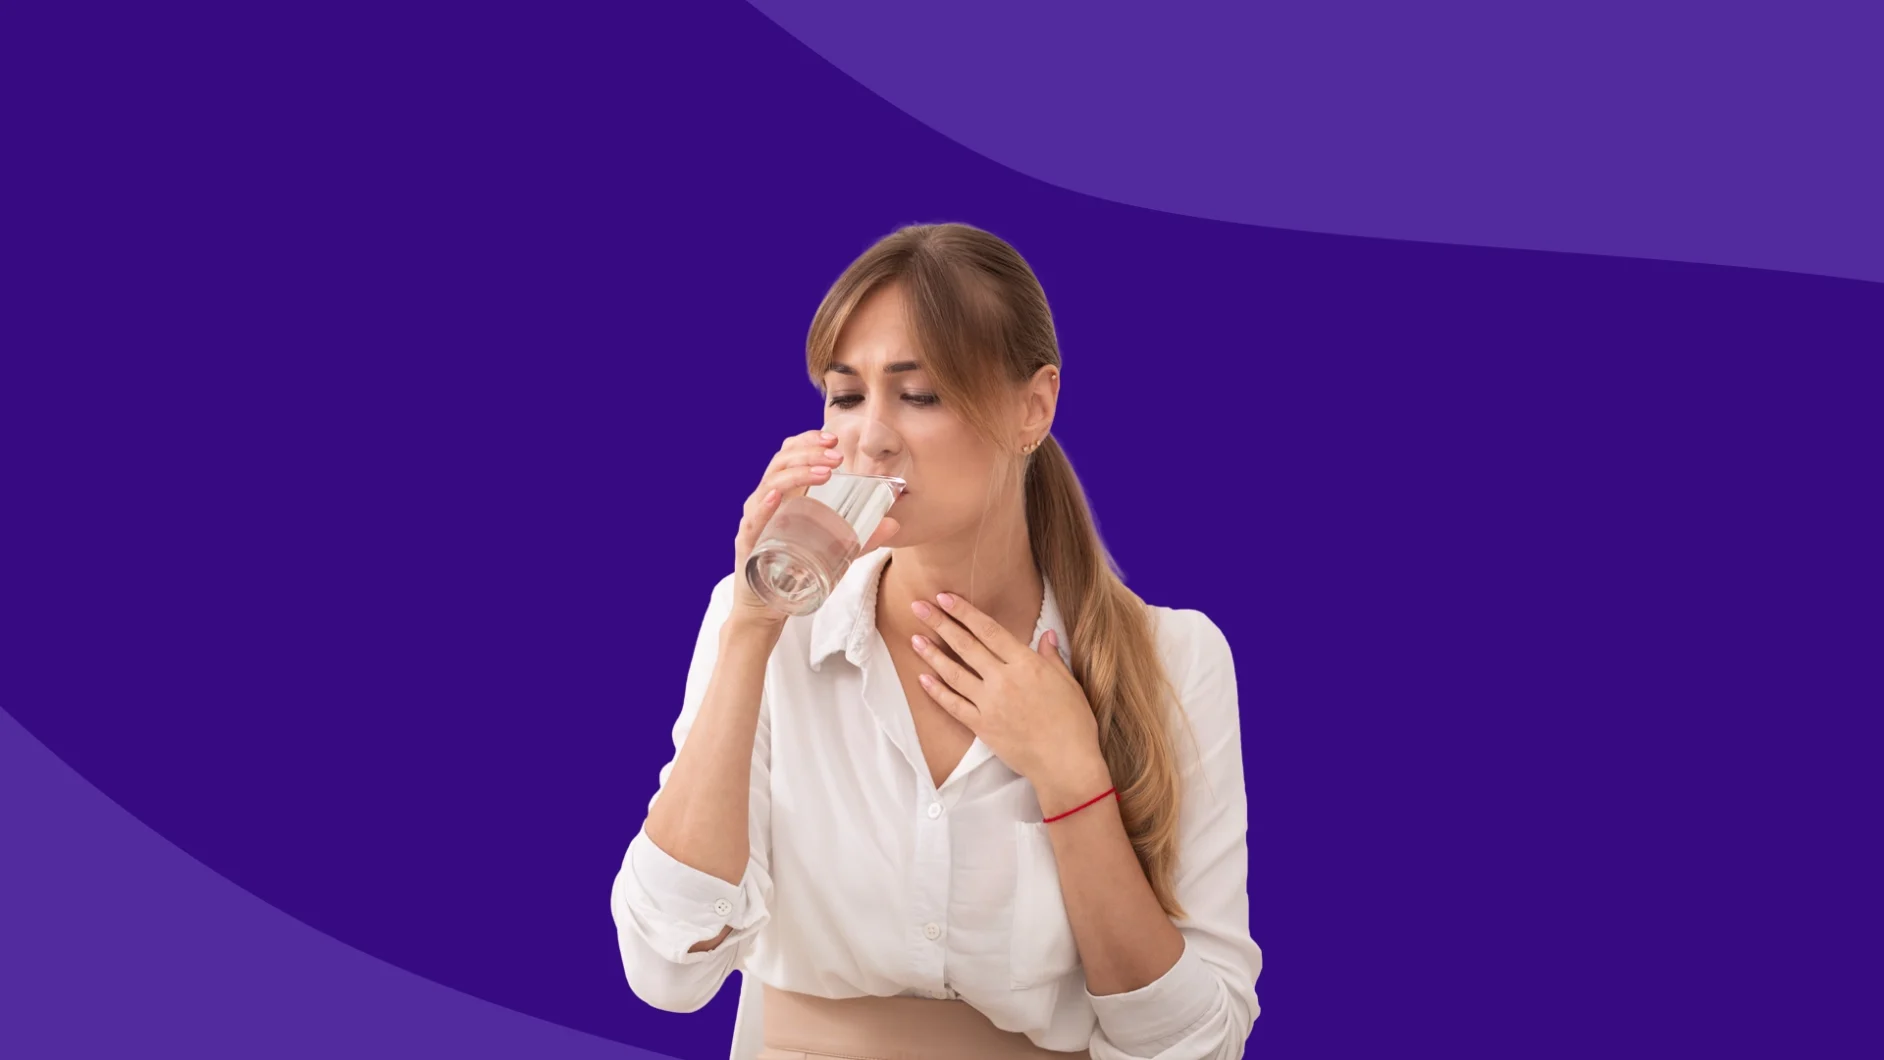 A woman holding her throat and drinking water: Does ibuprofen help with sore throat?